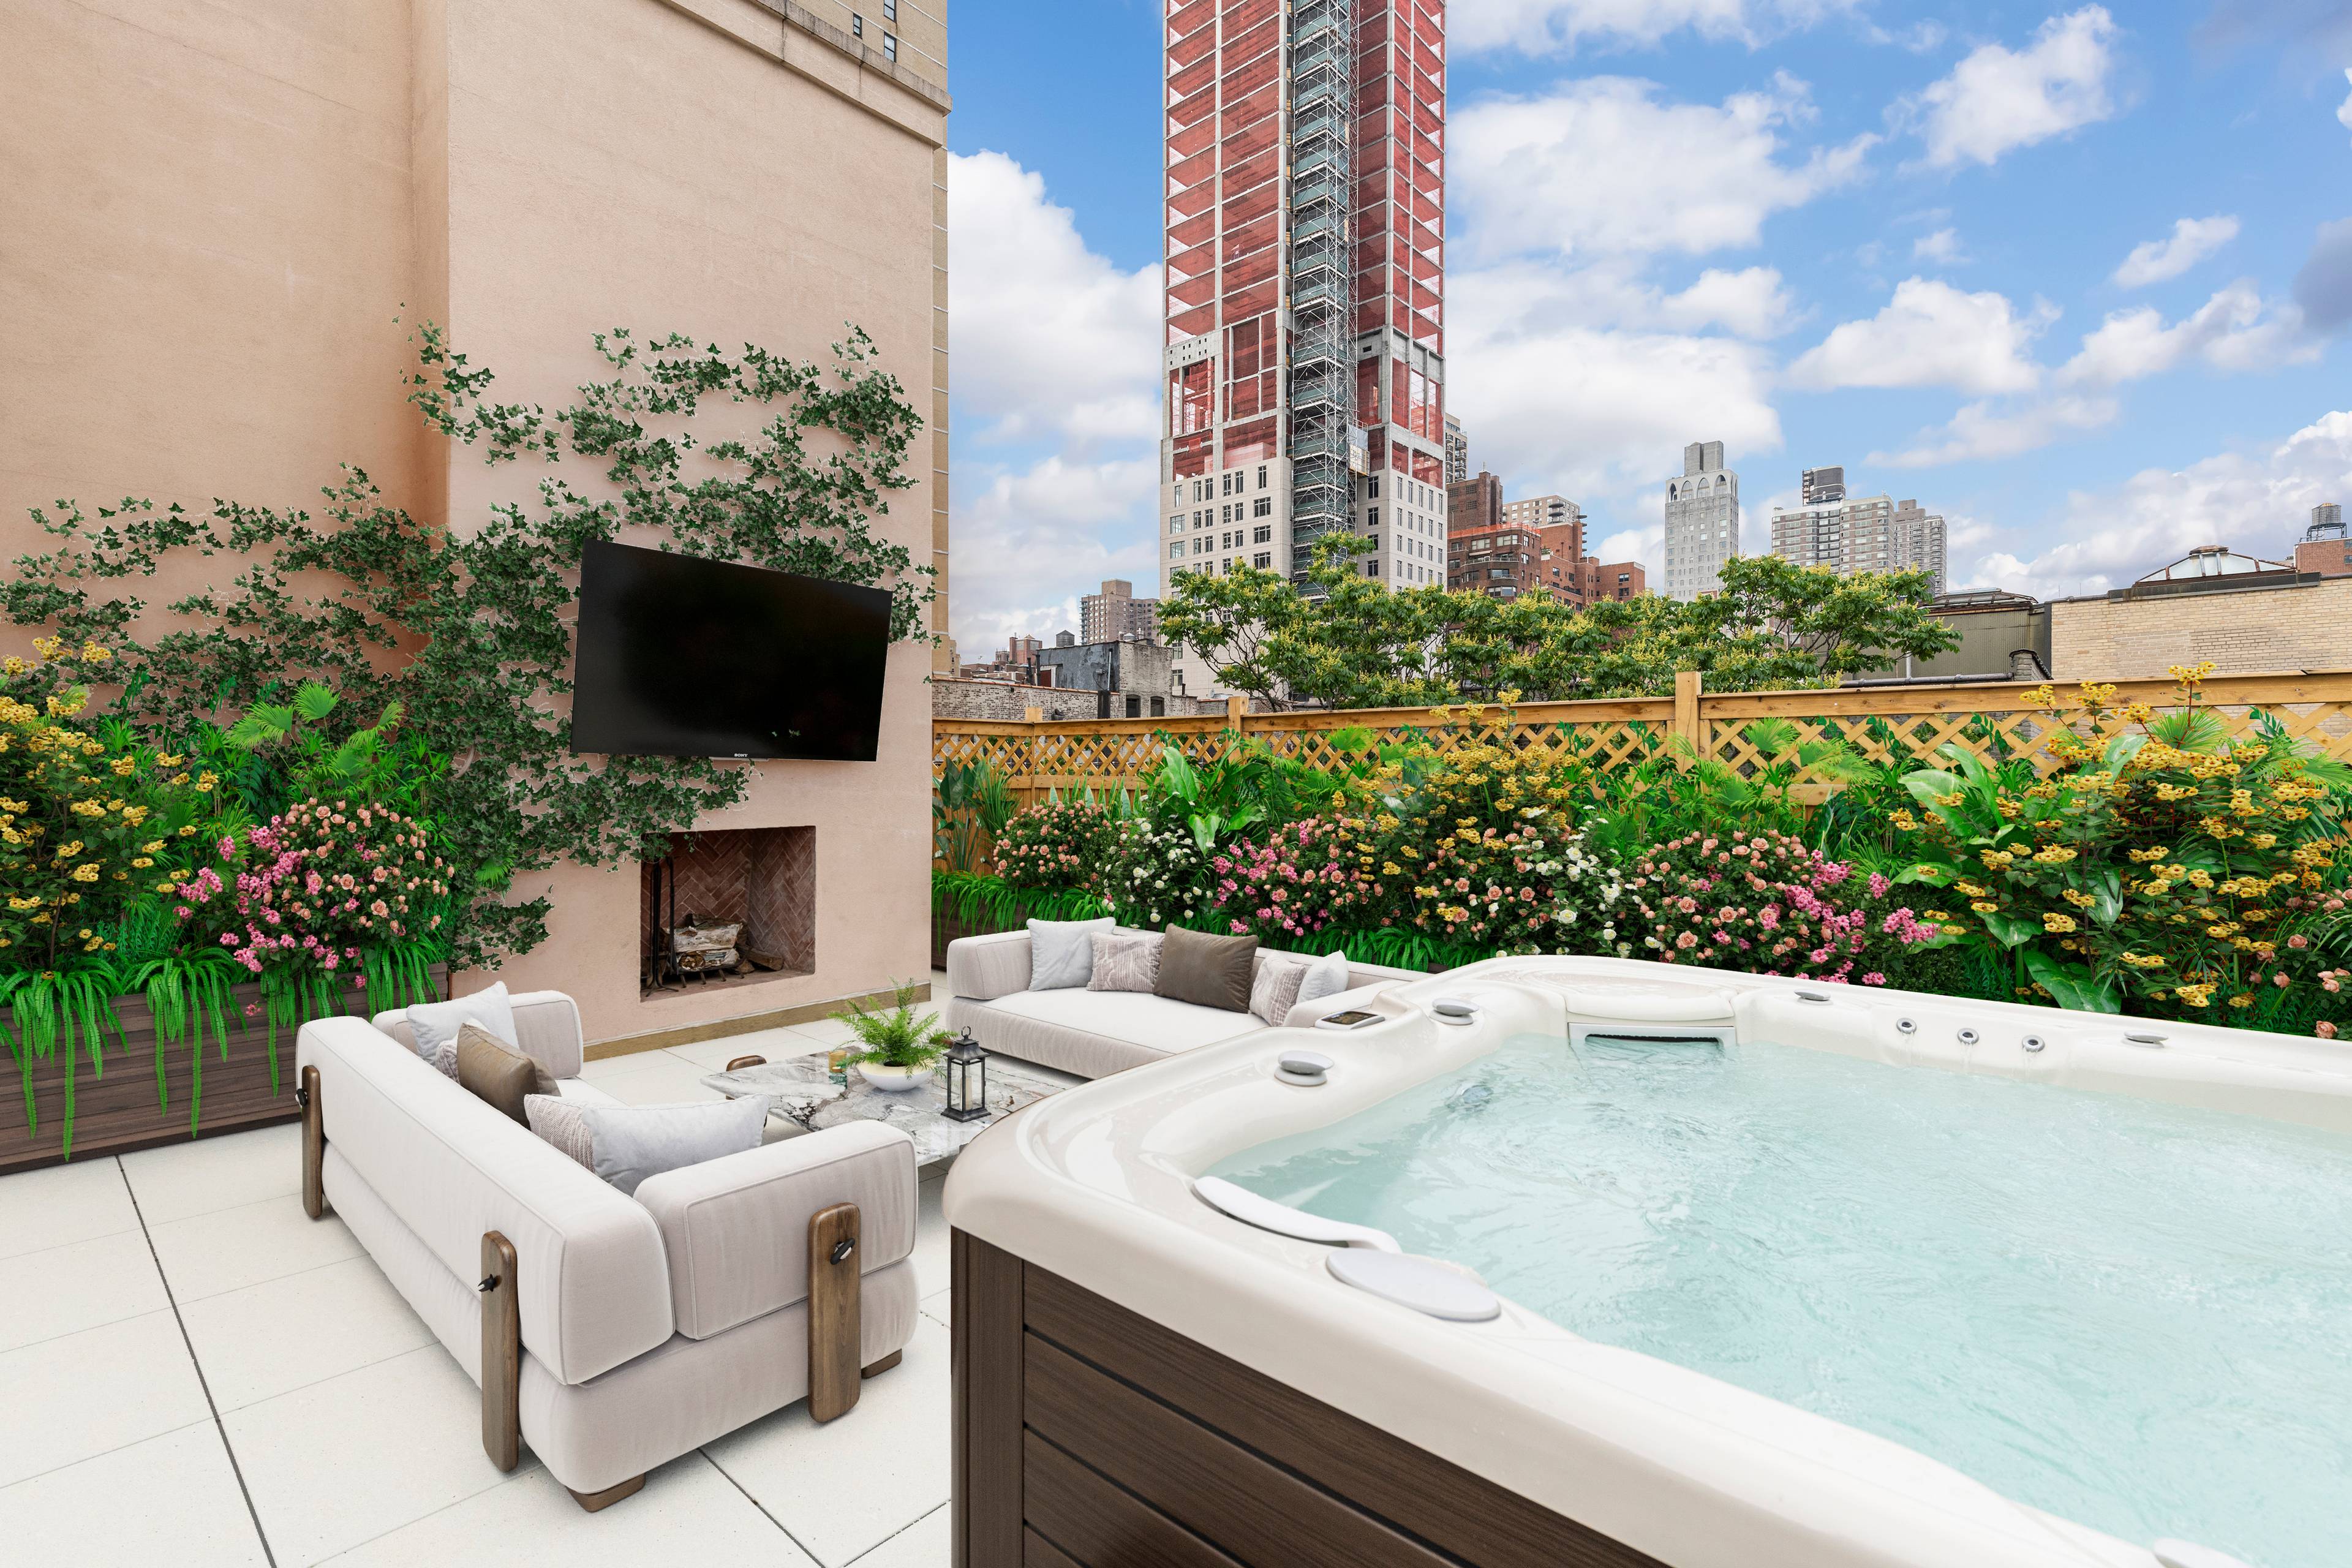 LUXURY PENTHOUSE WITH HOT TUB & 2 OUTDOOR SPACES